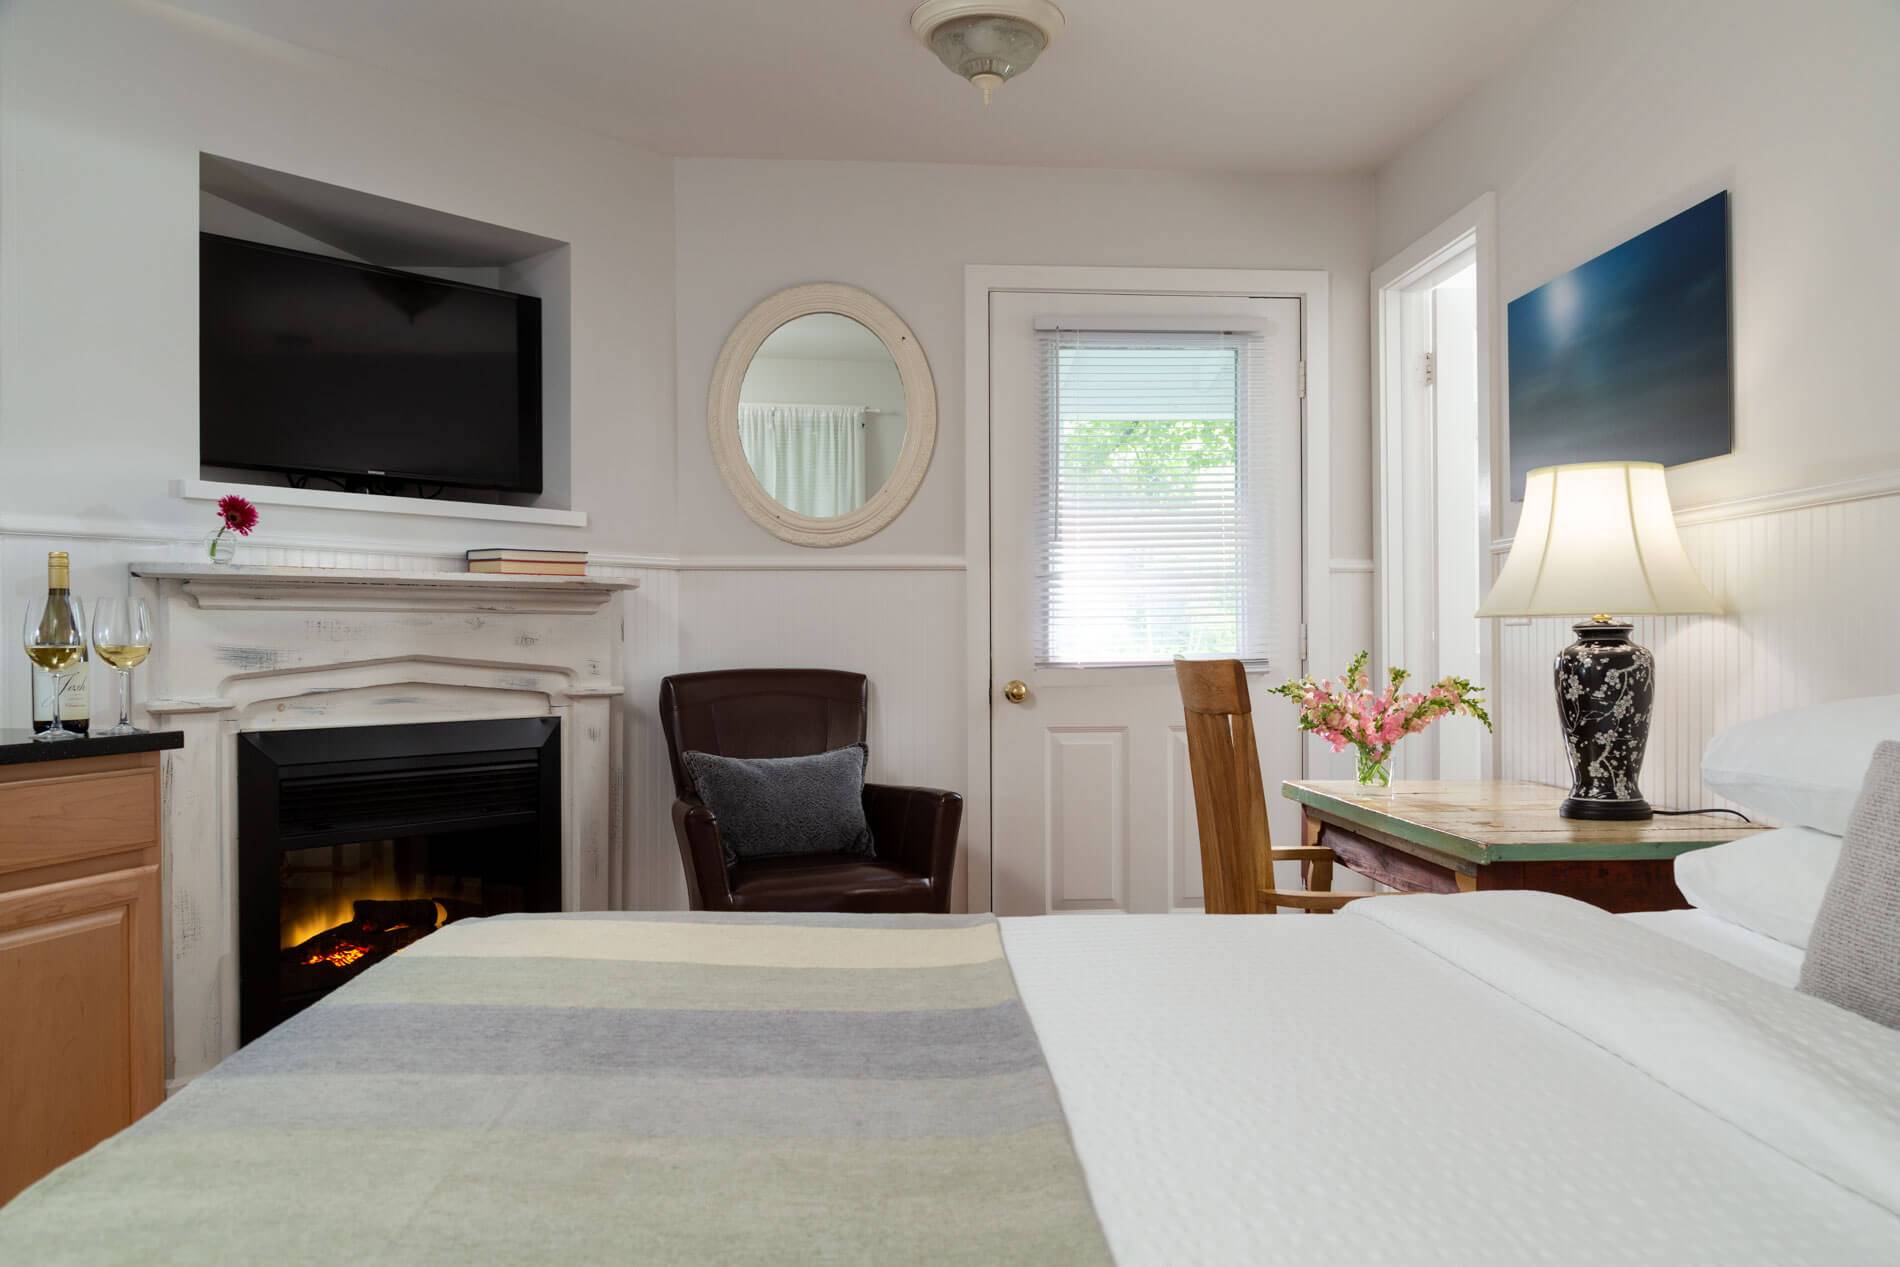 A bed with a white cover and green blanket at the foot is in the foreground, then in the room there's an electric fireplace , a black chair and a door with a sun filled window